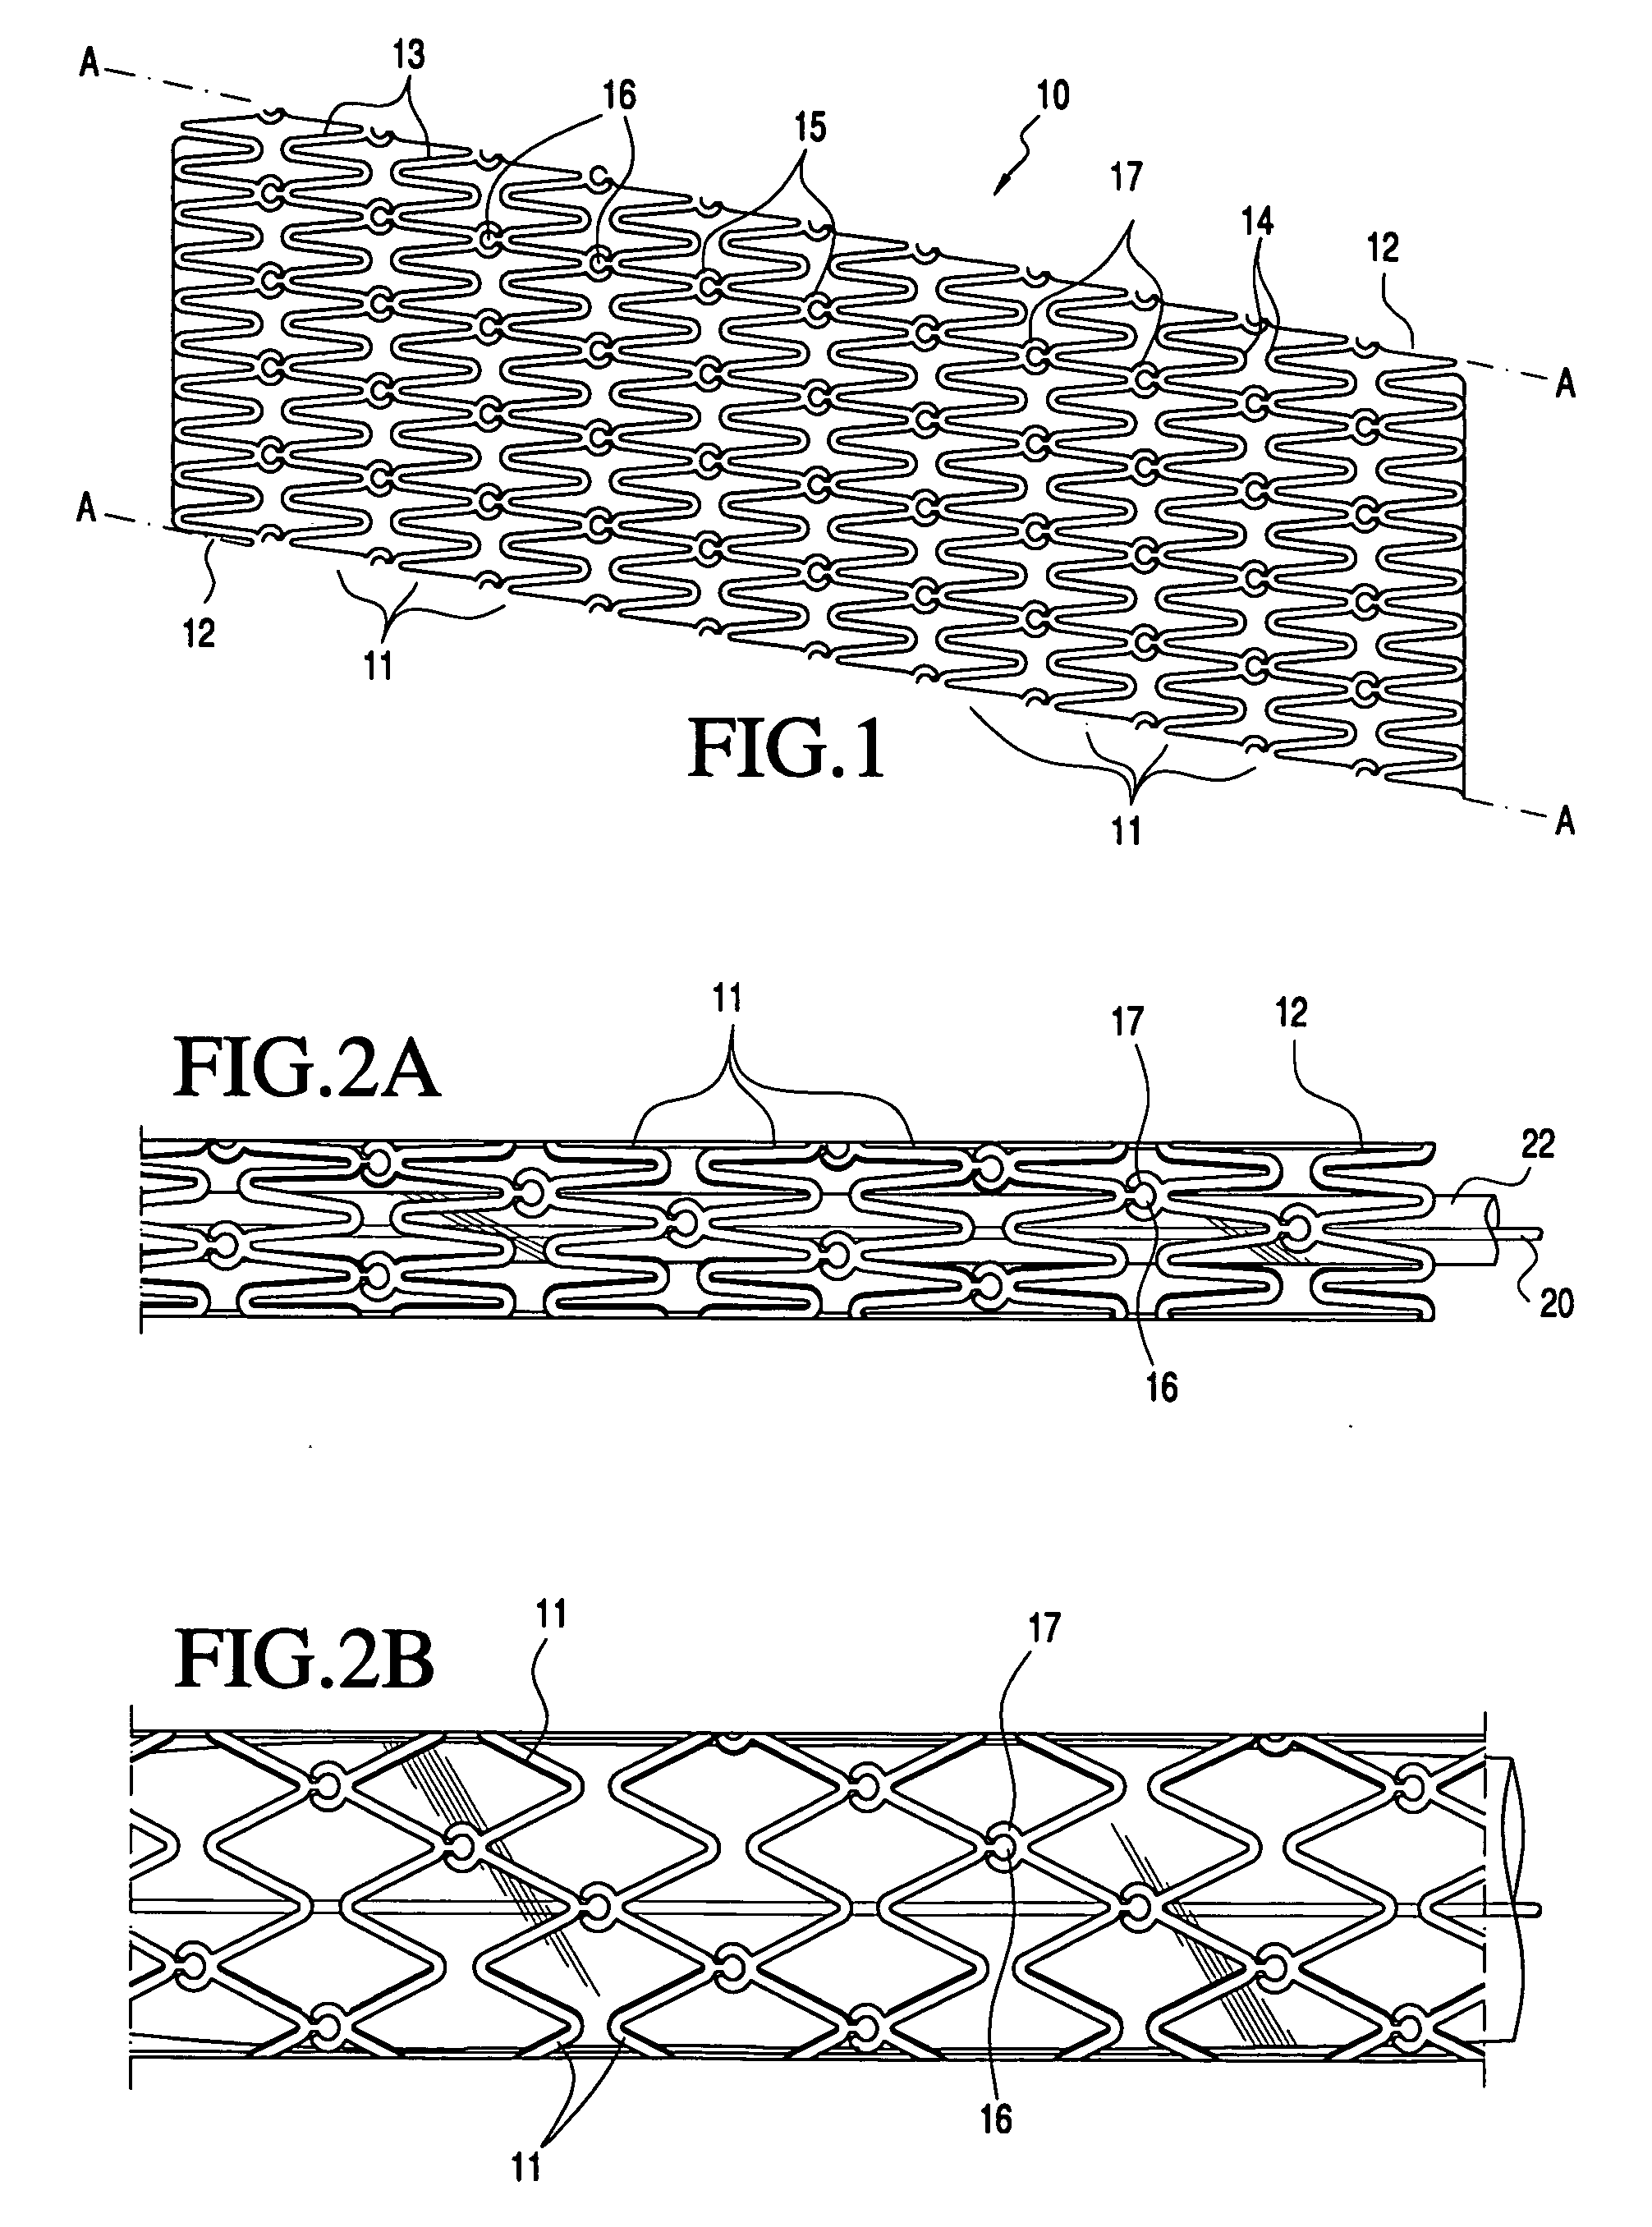 Modular vascular prosthesis having axially variable properties and improved flexibility and methods of use